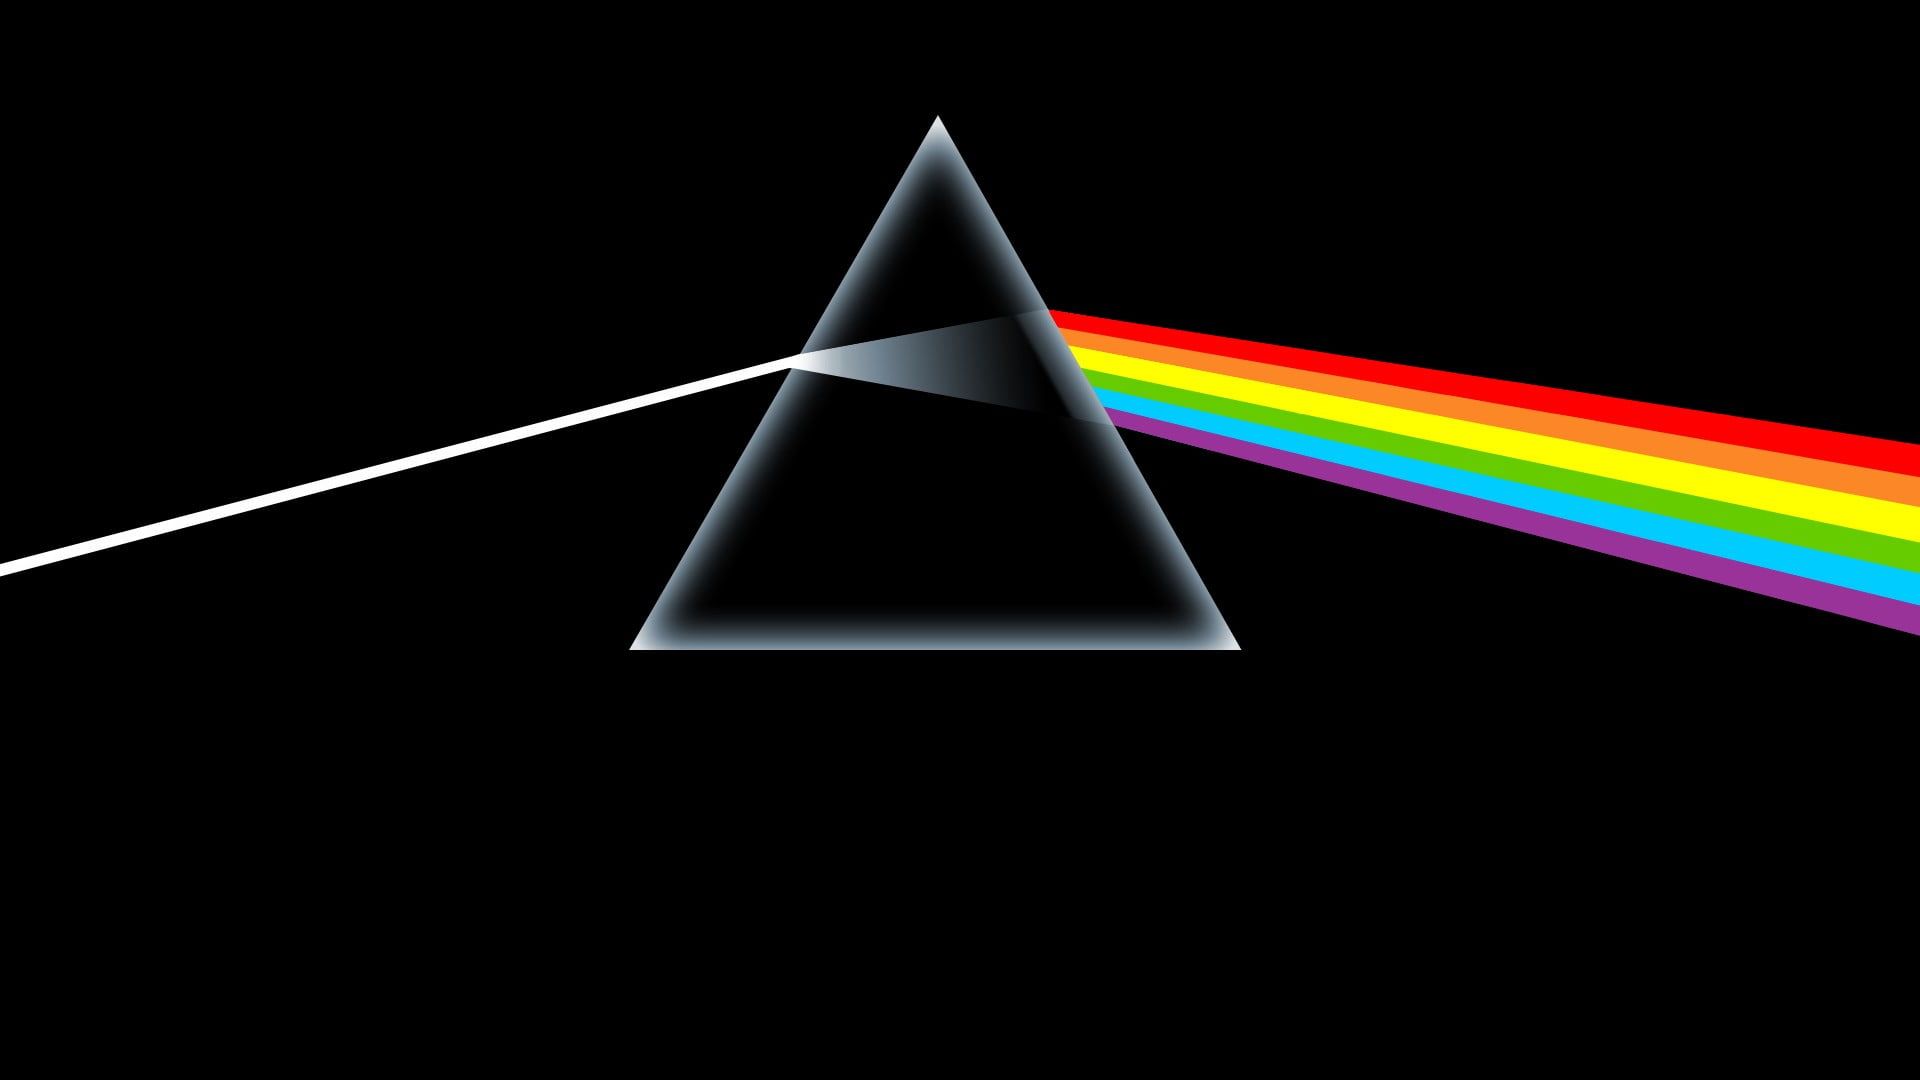 The Dark Side of the Moon by Pink Floyd wallpaper Pink Floyd #prism album covers cover art P #wallpap. Pink floyd wallpaper, Pink floyd dark side, Pink floyd